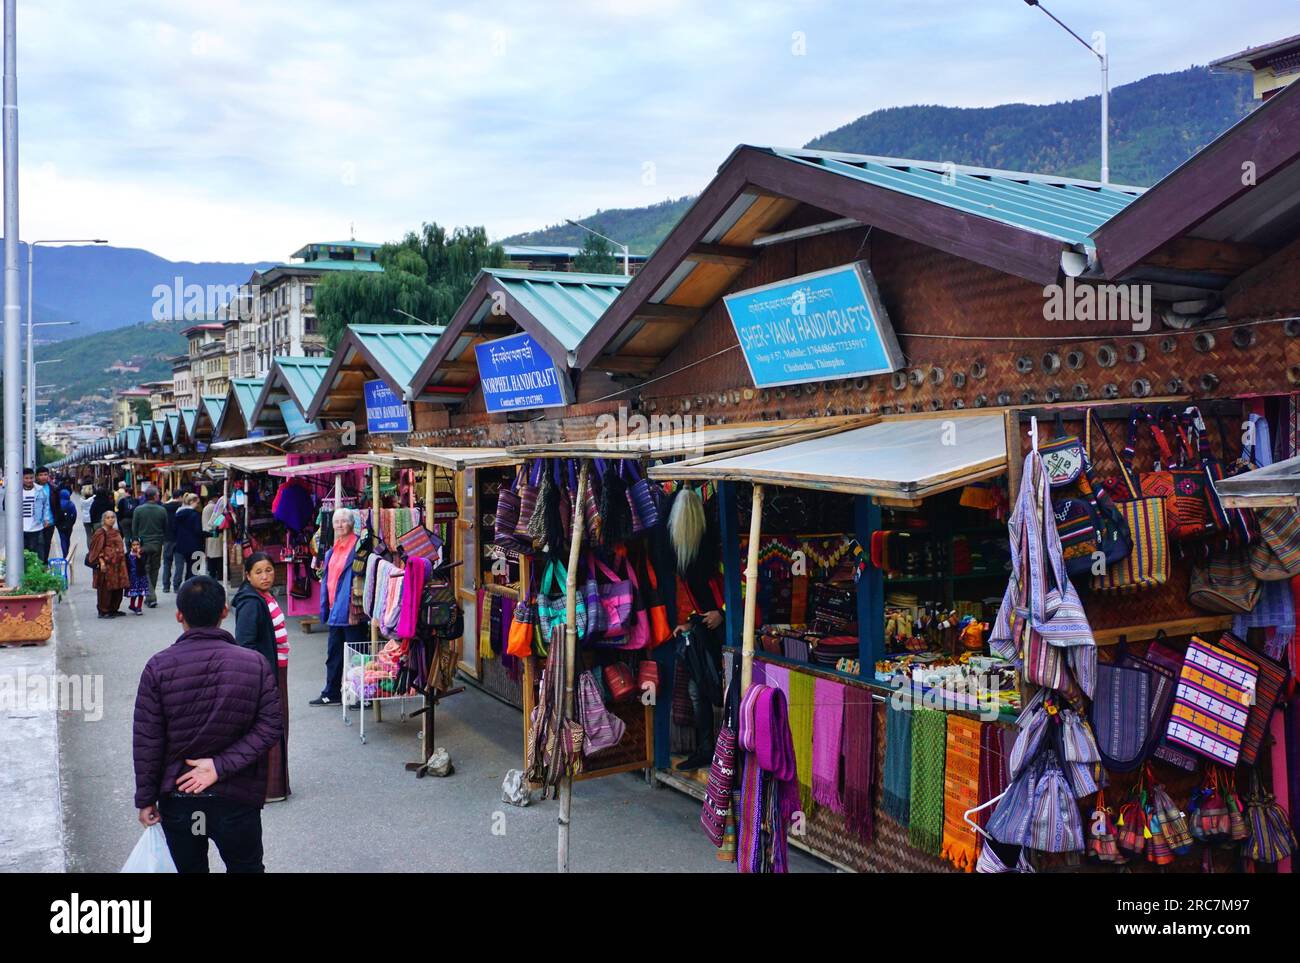 A row of identical shopping kiosks line a busy street in Thimphu, Bhutan. Local vendors sell clothing, jewelry, handicrafts, souvenirs and other items Stock Photo